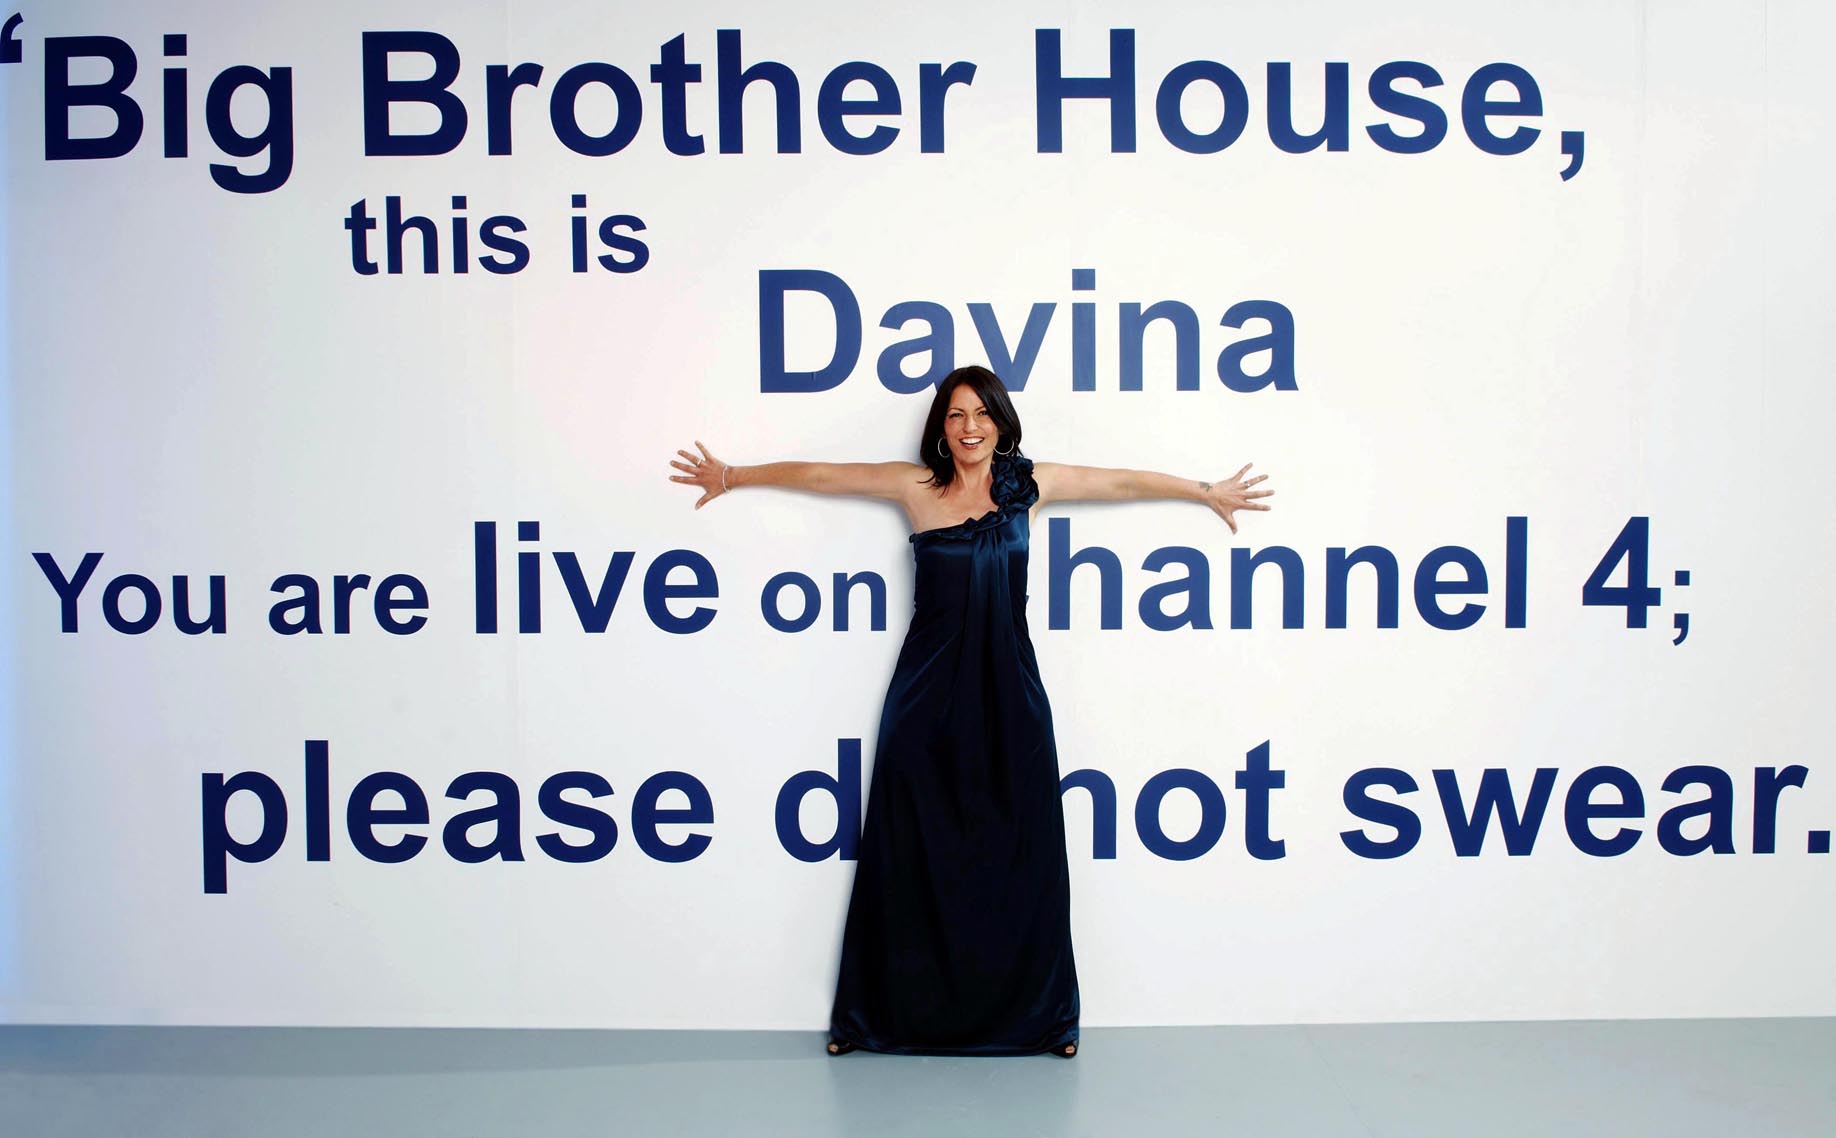 Day 25: Davina McCall: “Big Brother too much of a commitment”